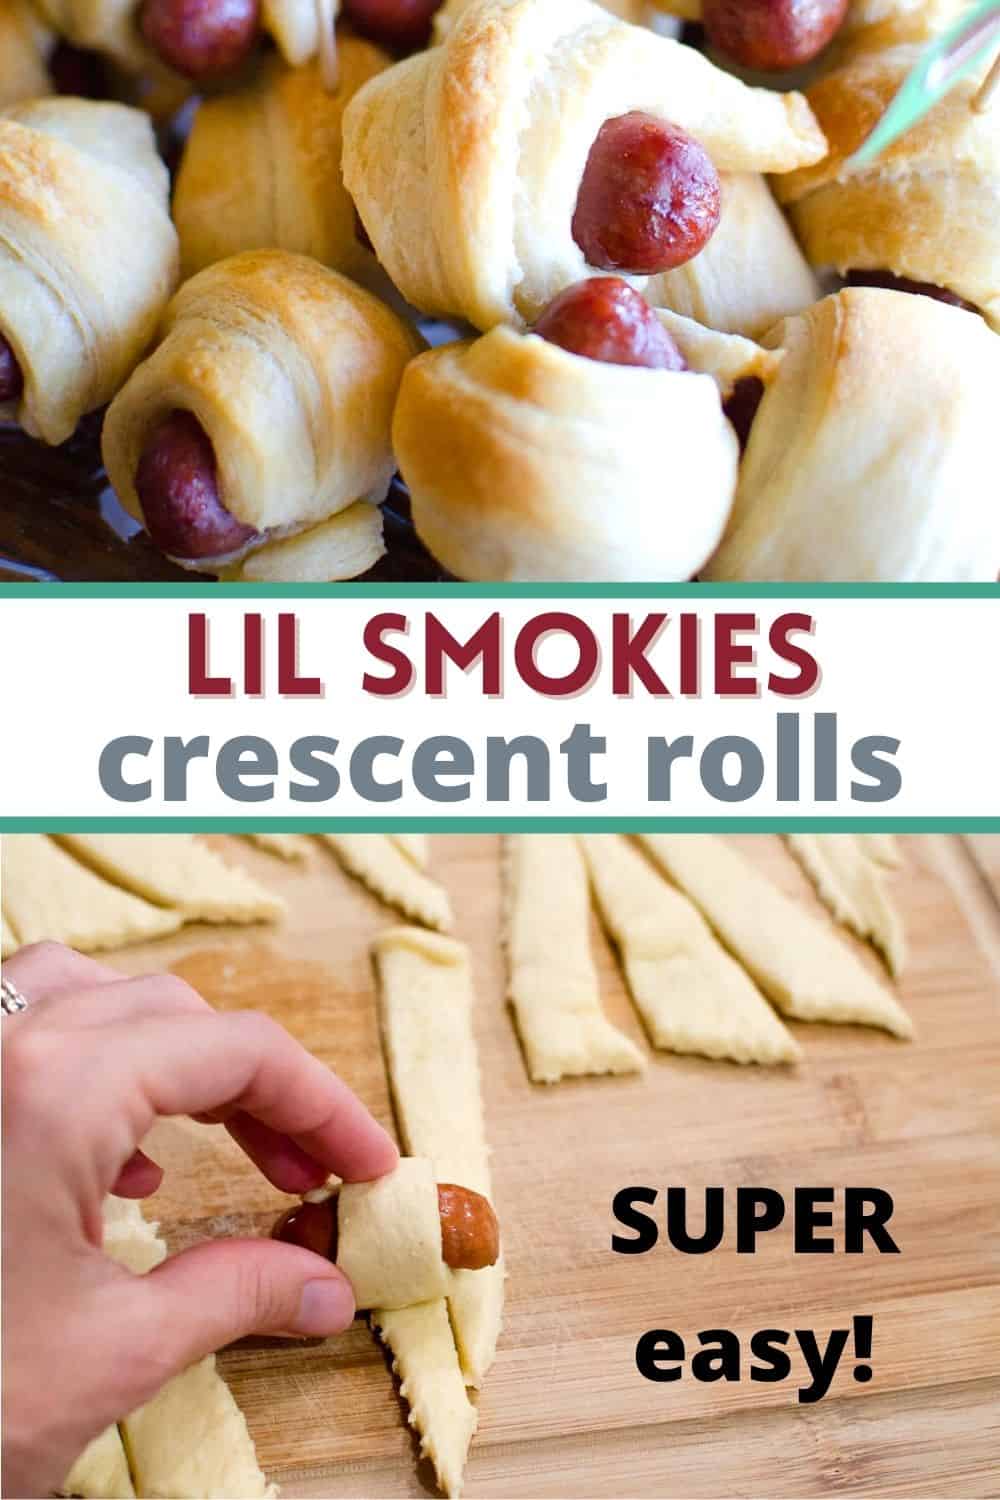 This pigs in a blanket recipe is only two ingredients: Lil smokies and crescent rolls. Perfect party food or eat for breakfast!